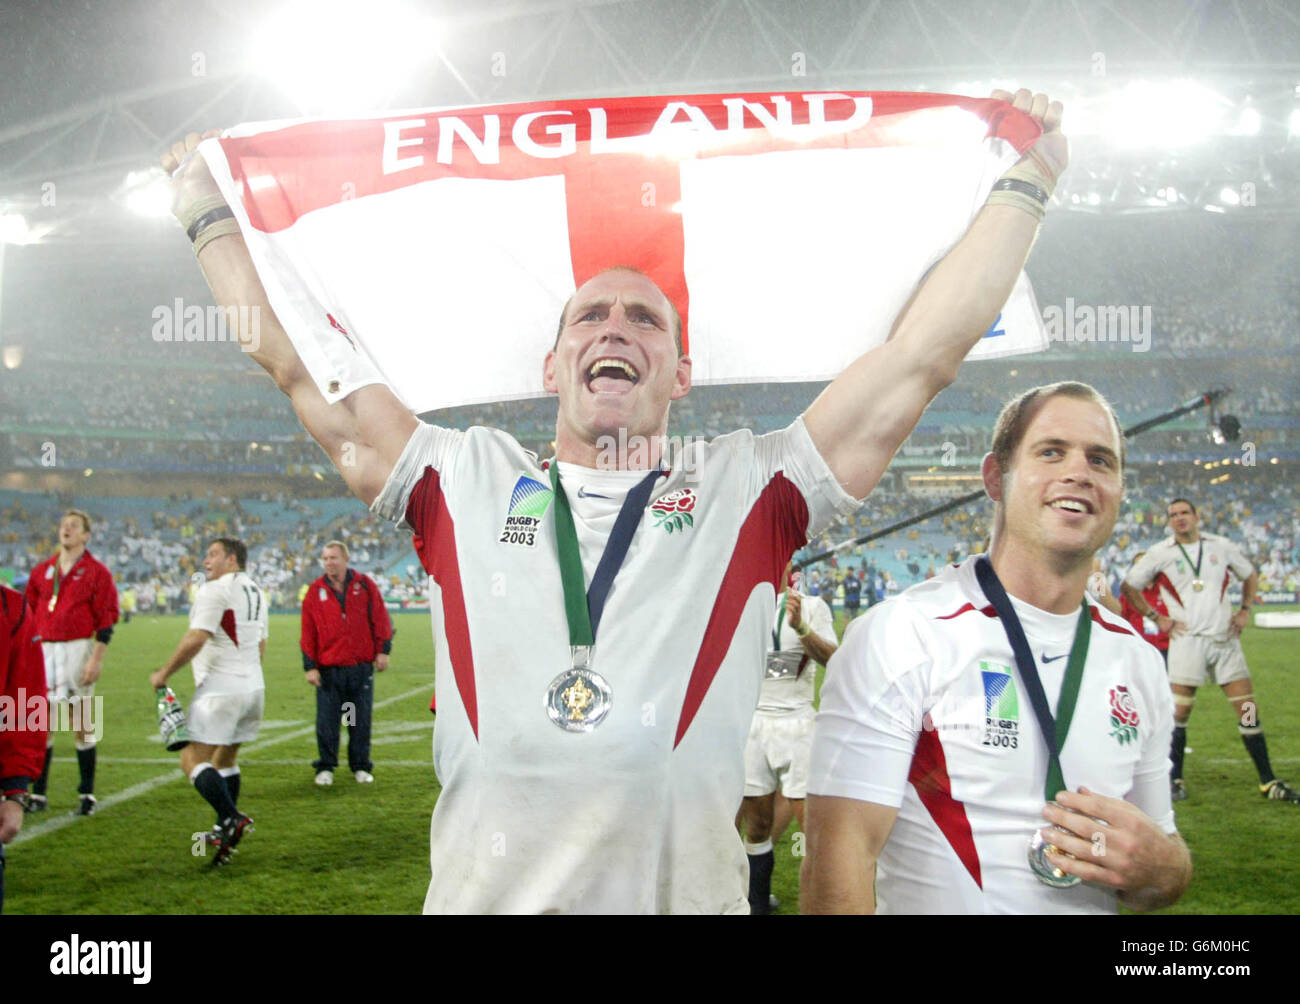 Lawrence Dallaglio holds aloft the St George's flag alongside team-mate Kyran Bracken (right) after the Rugby World Cup Final against Australia at the Telstra Stadium, Sydney, Australia. England won 20-17 after extra-time. No mobile phone use, Internet sites may only use one image every five minutes during match Stock Photo